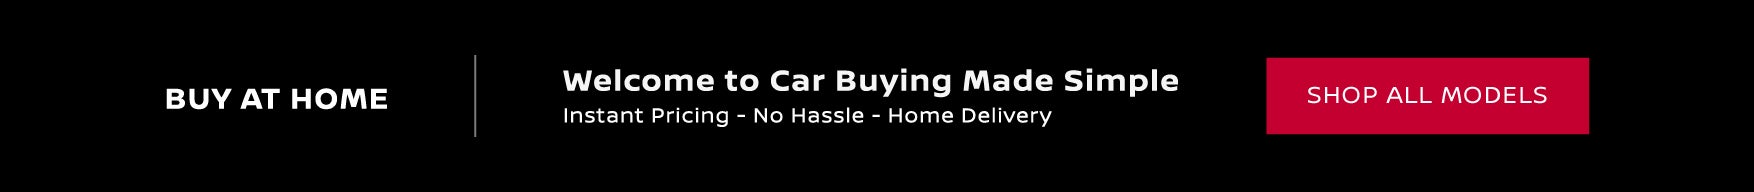 Car buying made simple!